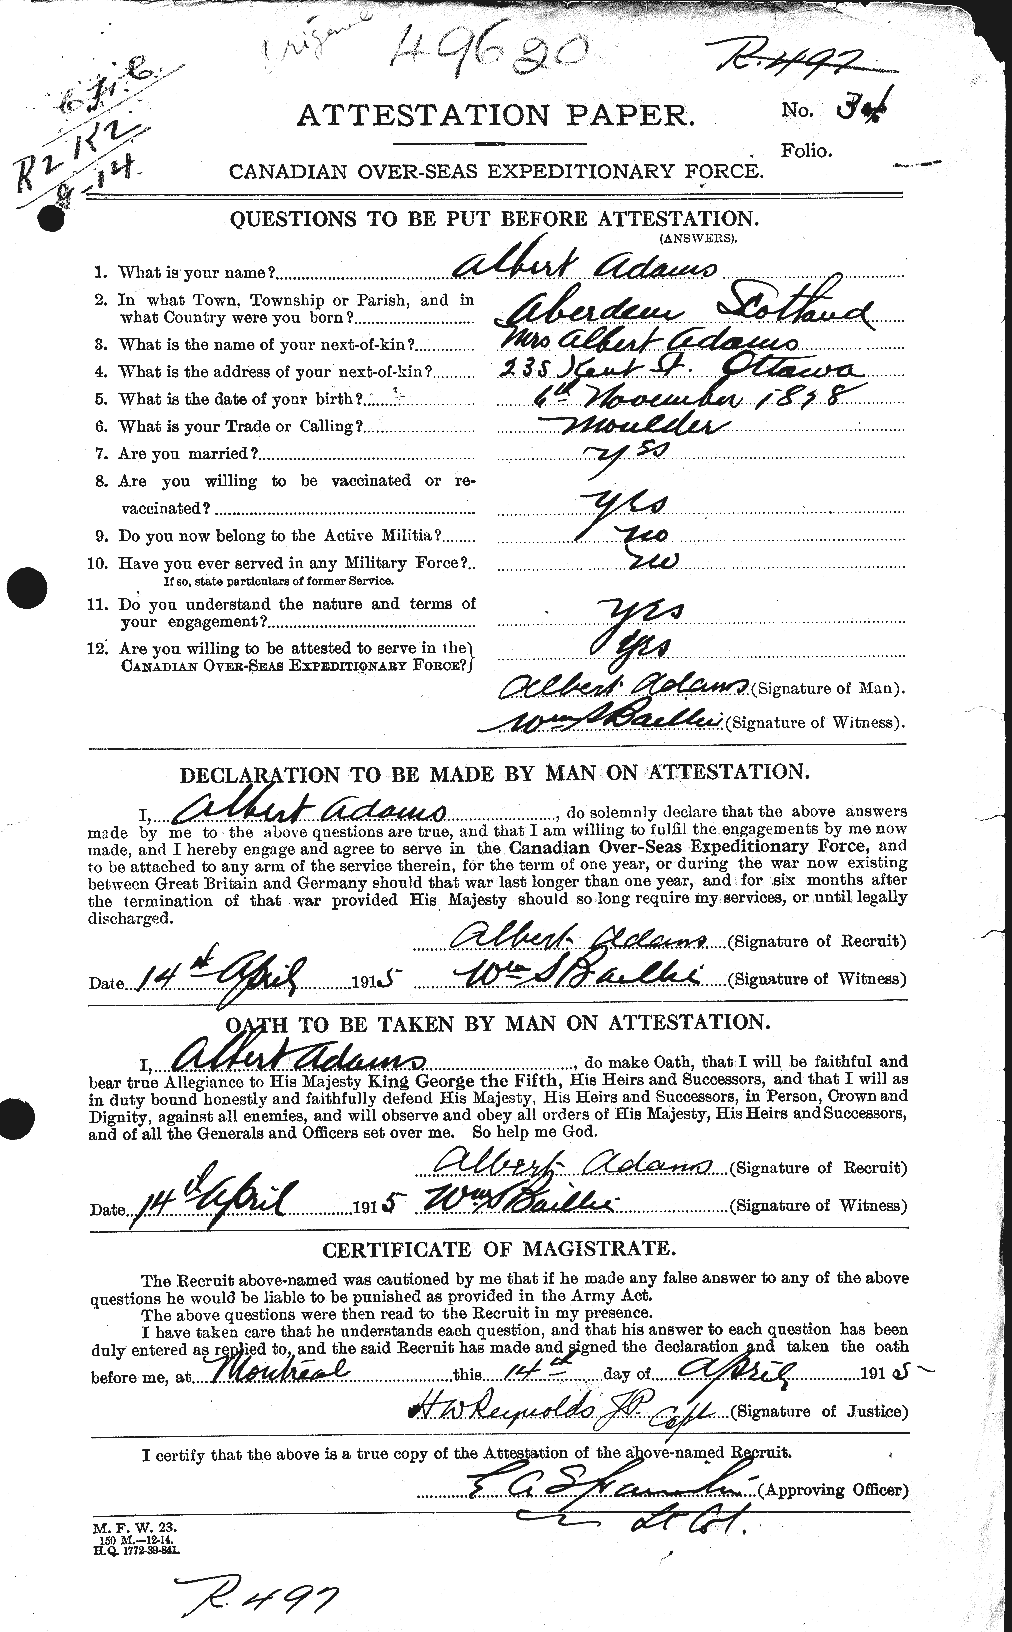 Personnel Records of the First World War - CEF 690898a